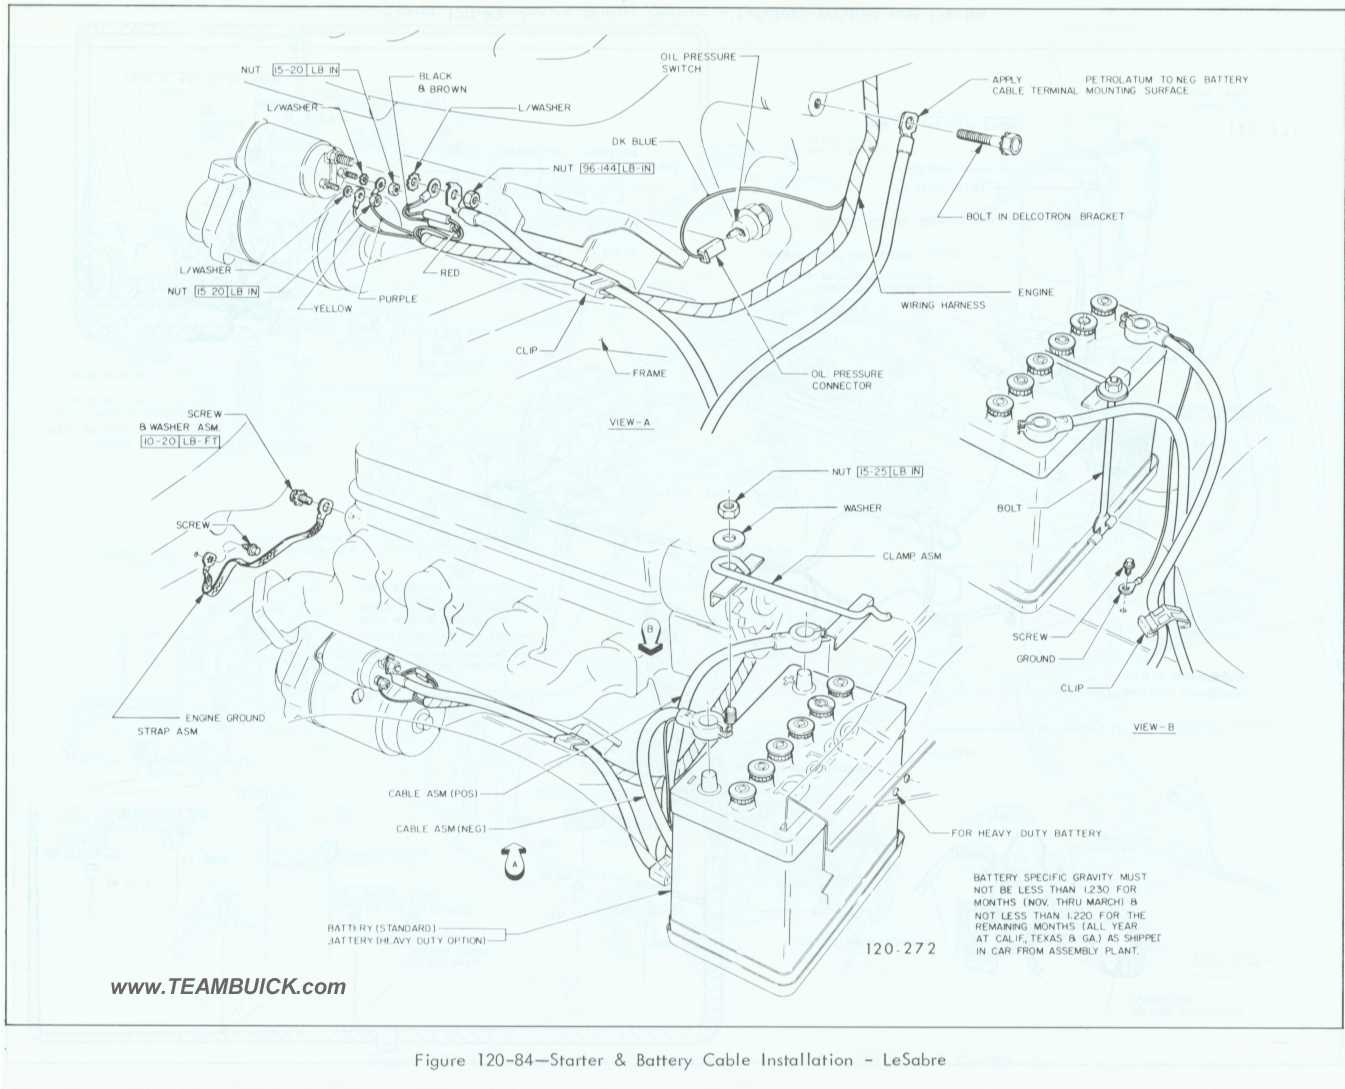 1967 Buick LeSabre, Starter and Battery Cable Installation